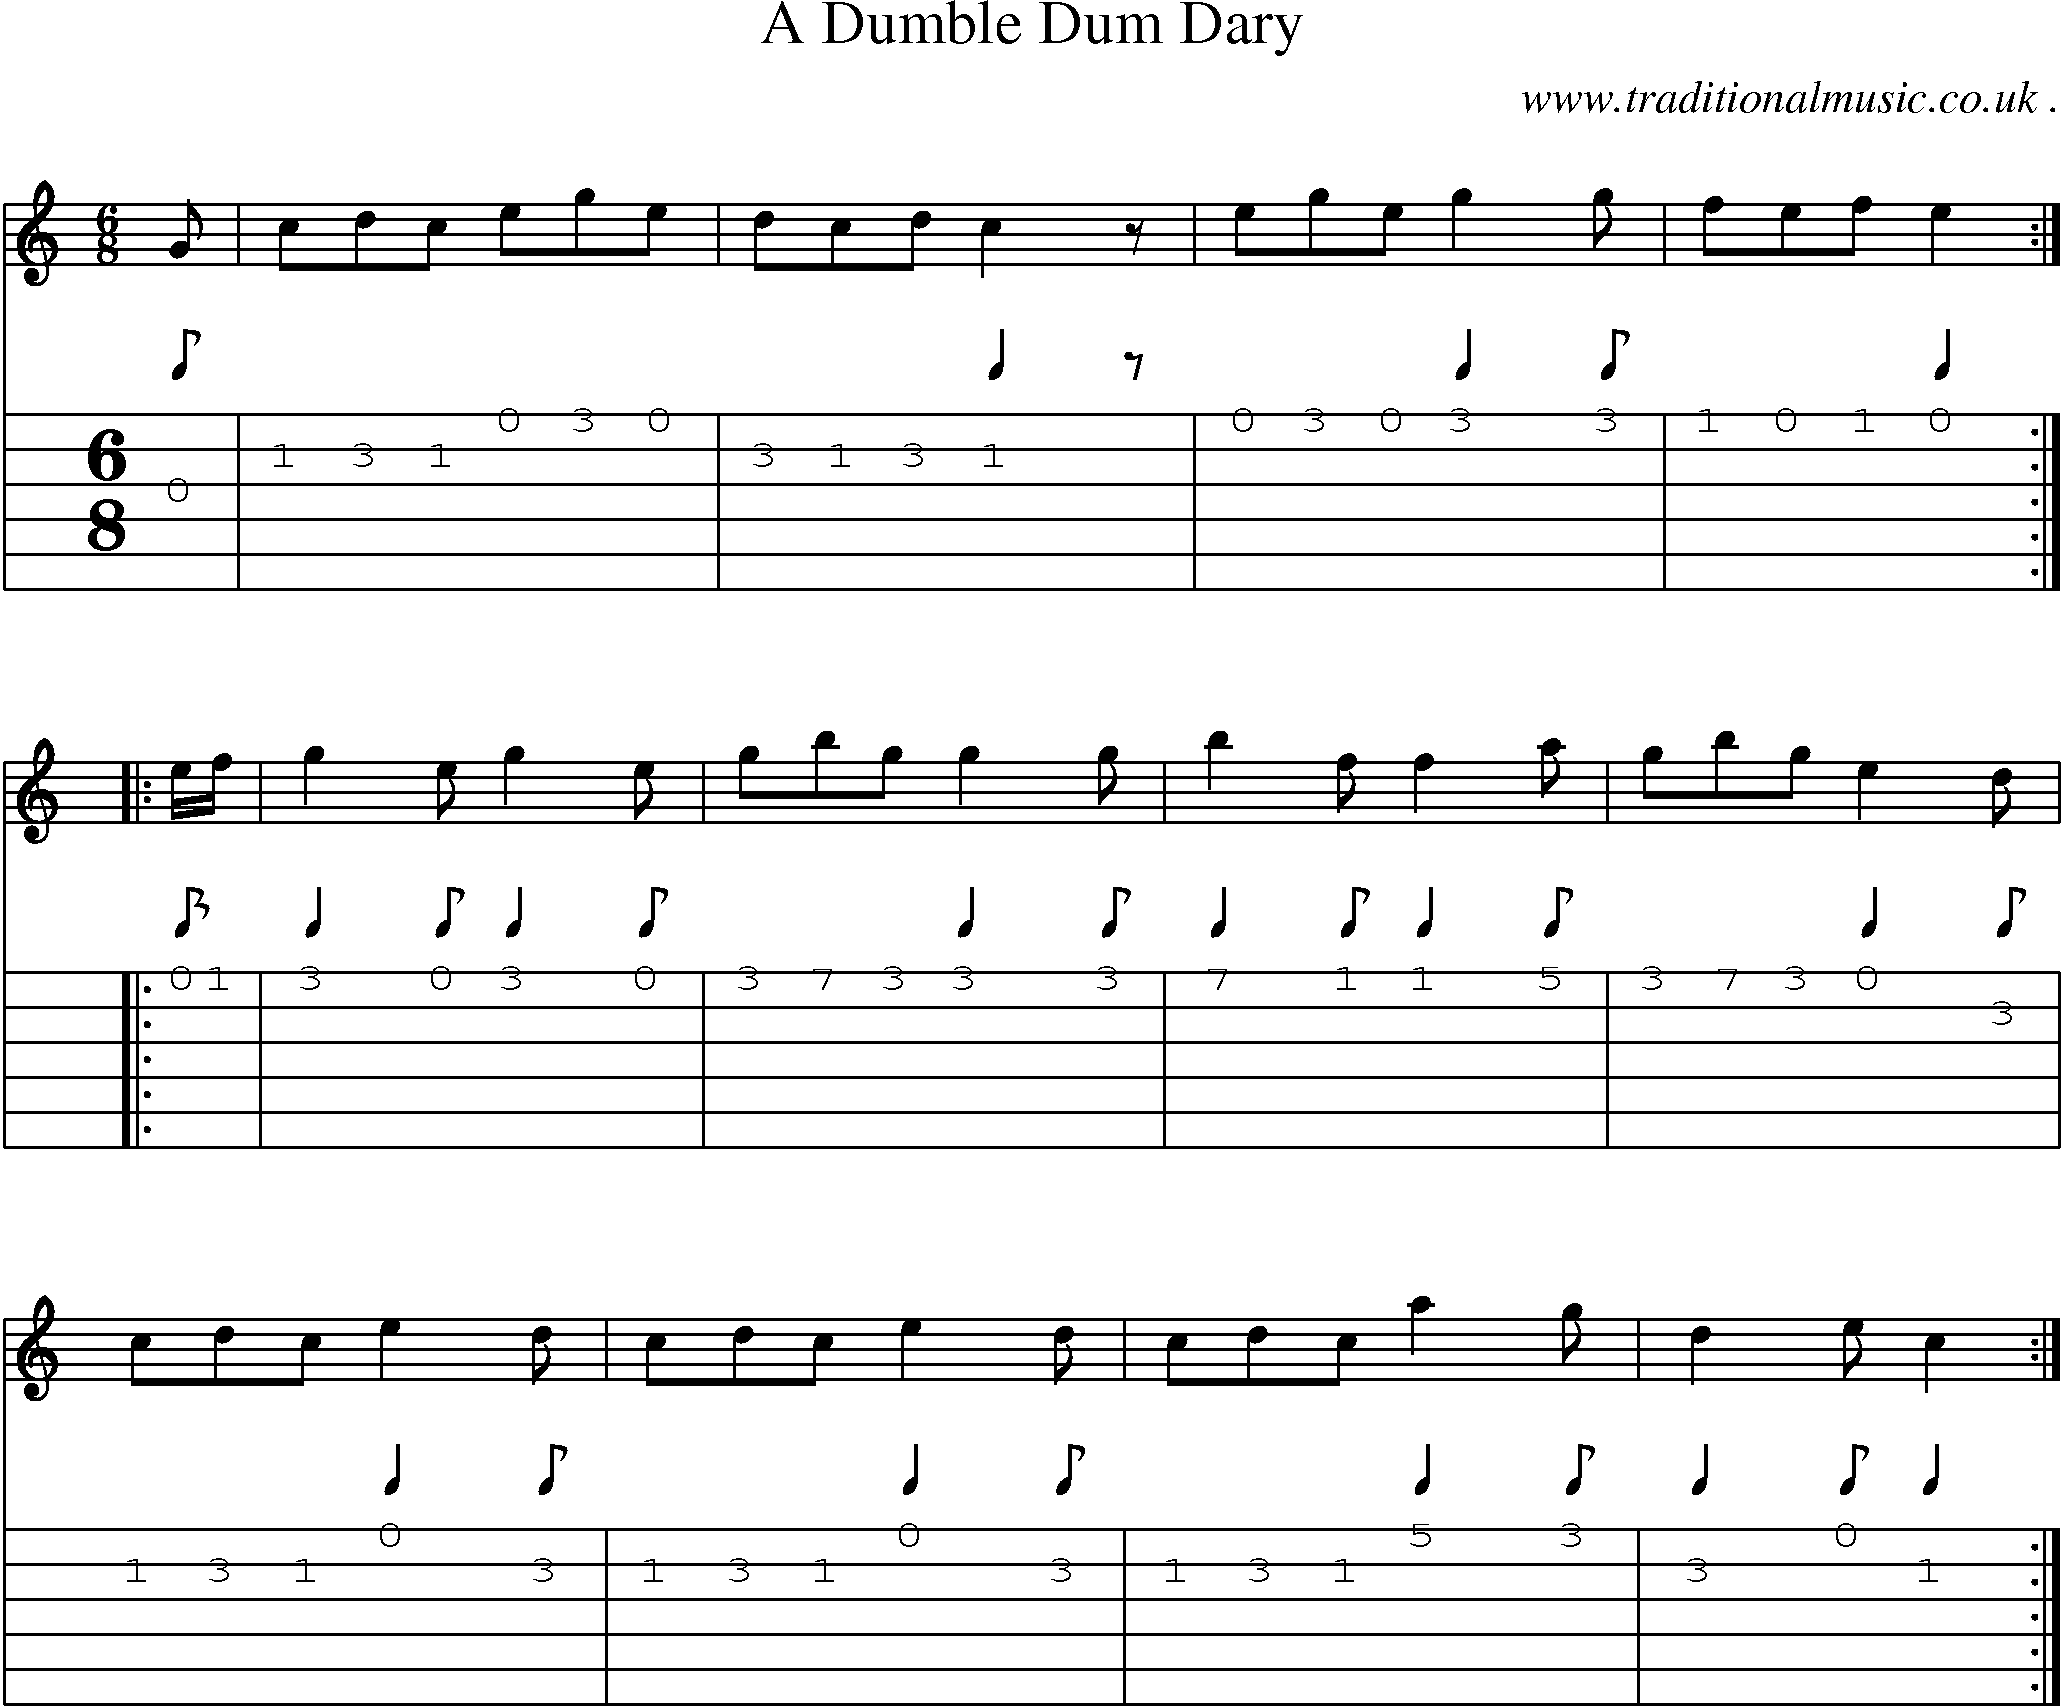 Sheet-Music and Guitar Tabs for A Dumble Dum Dary